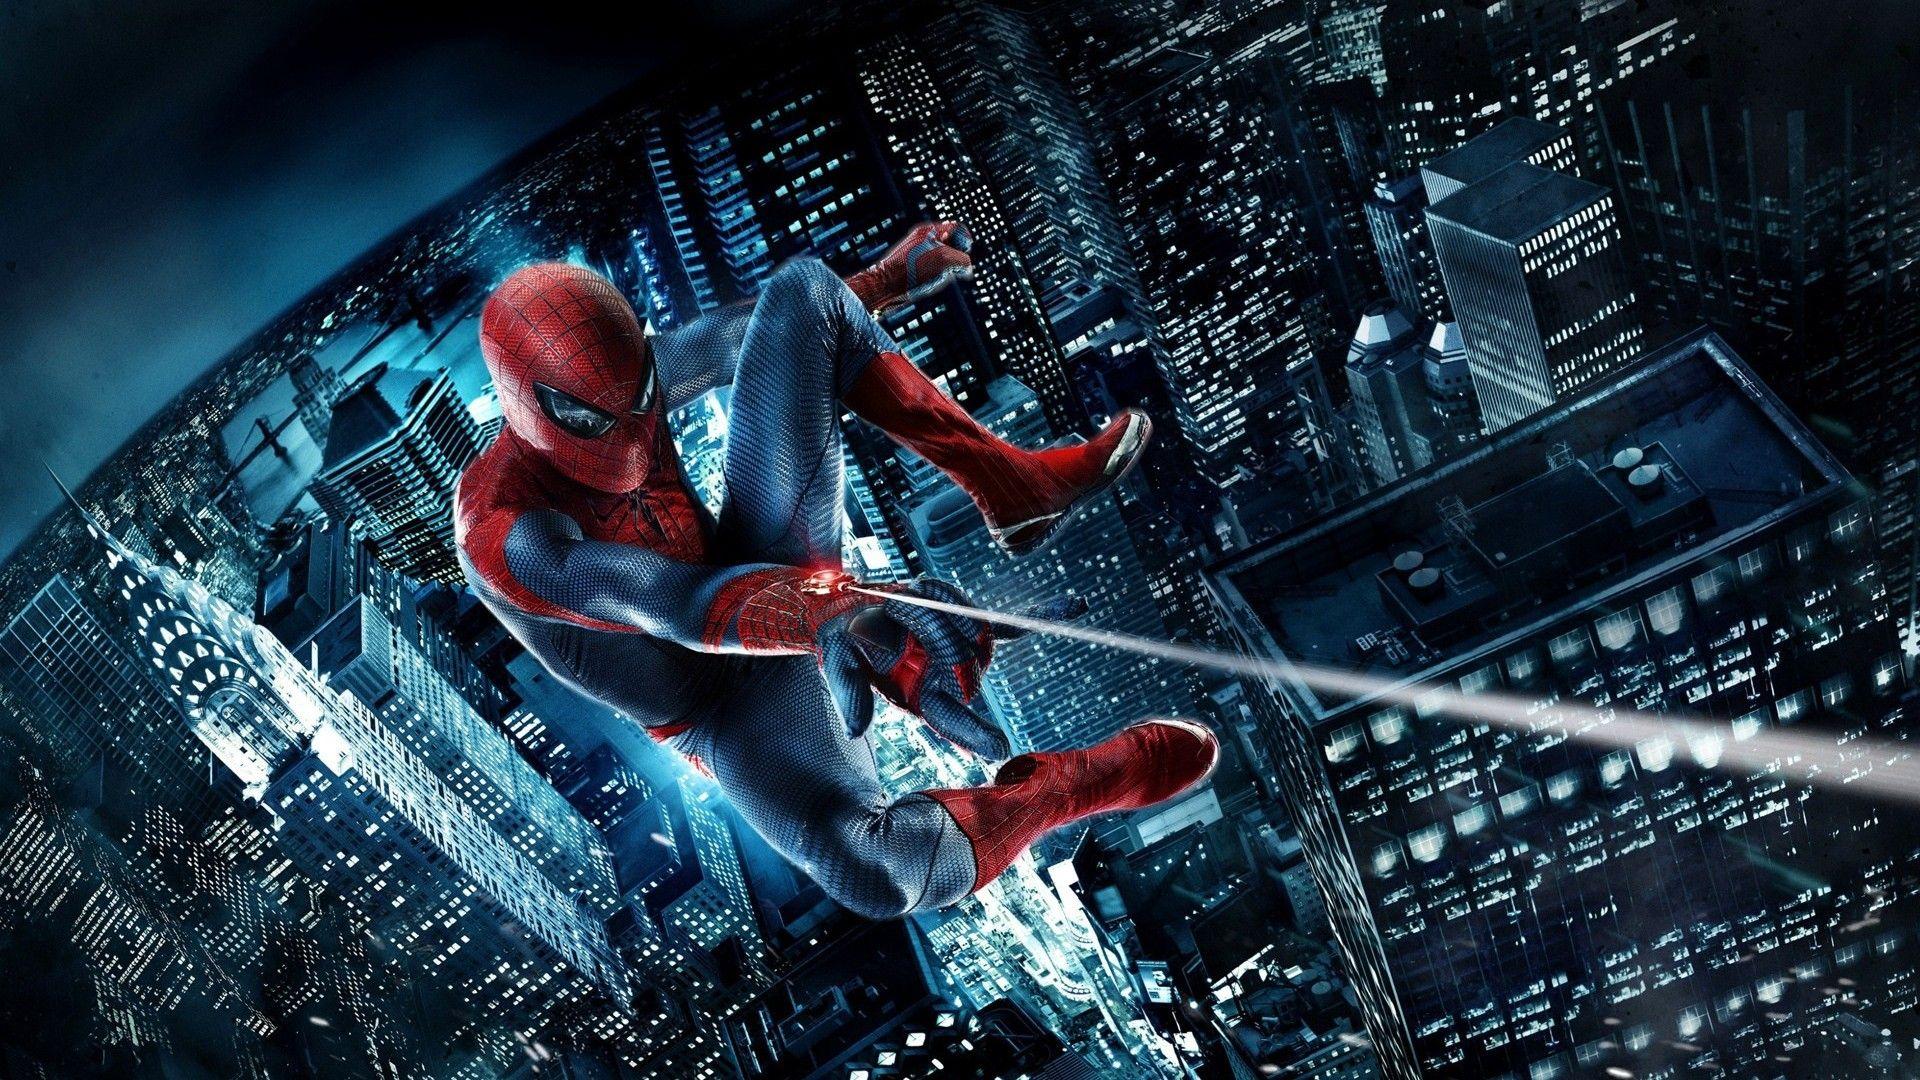 Spiderman Wallpaper For Android